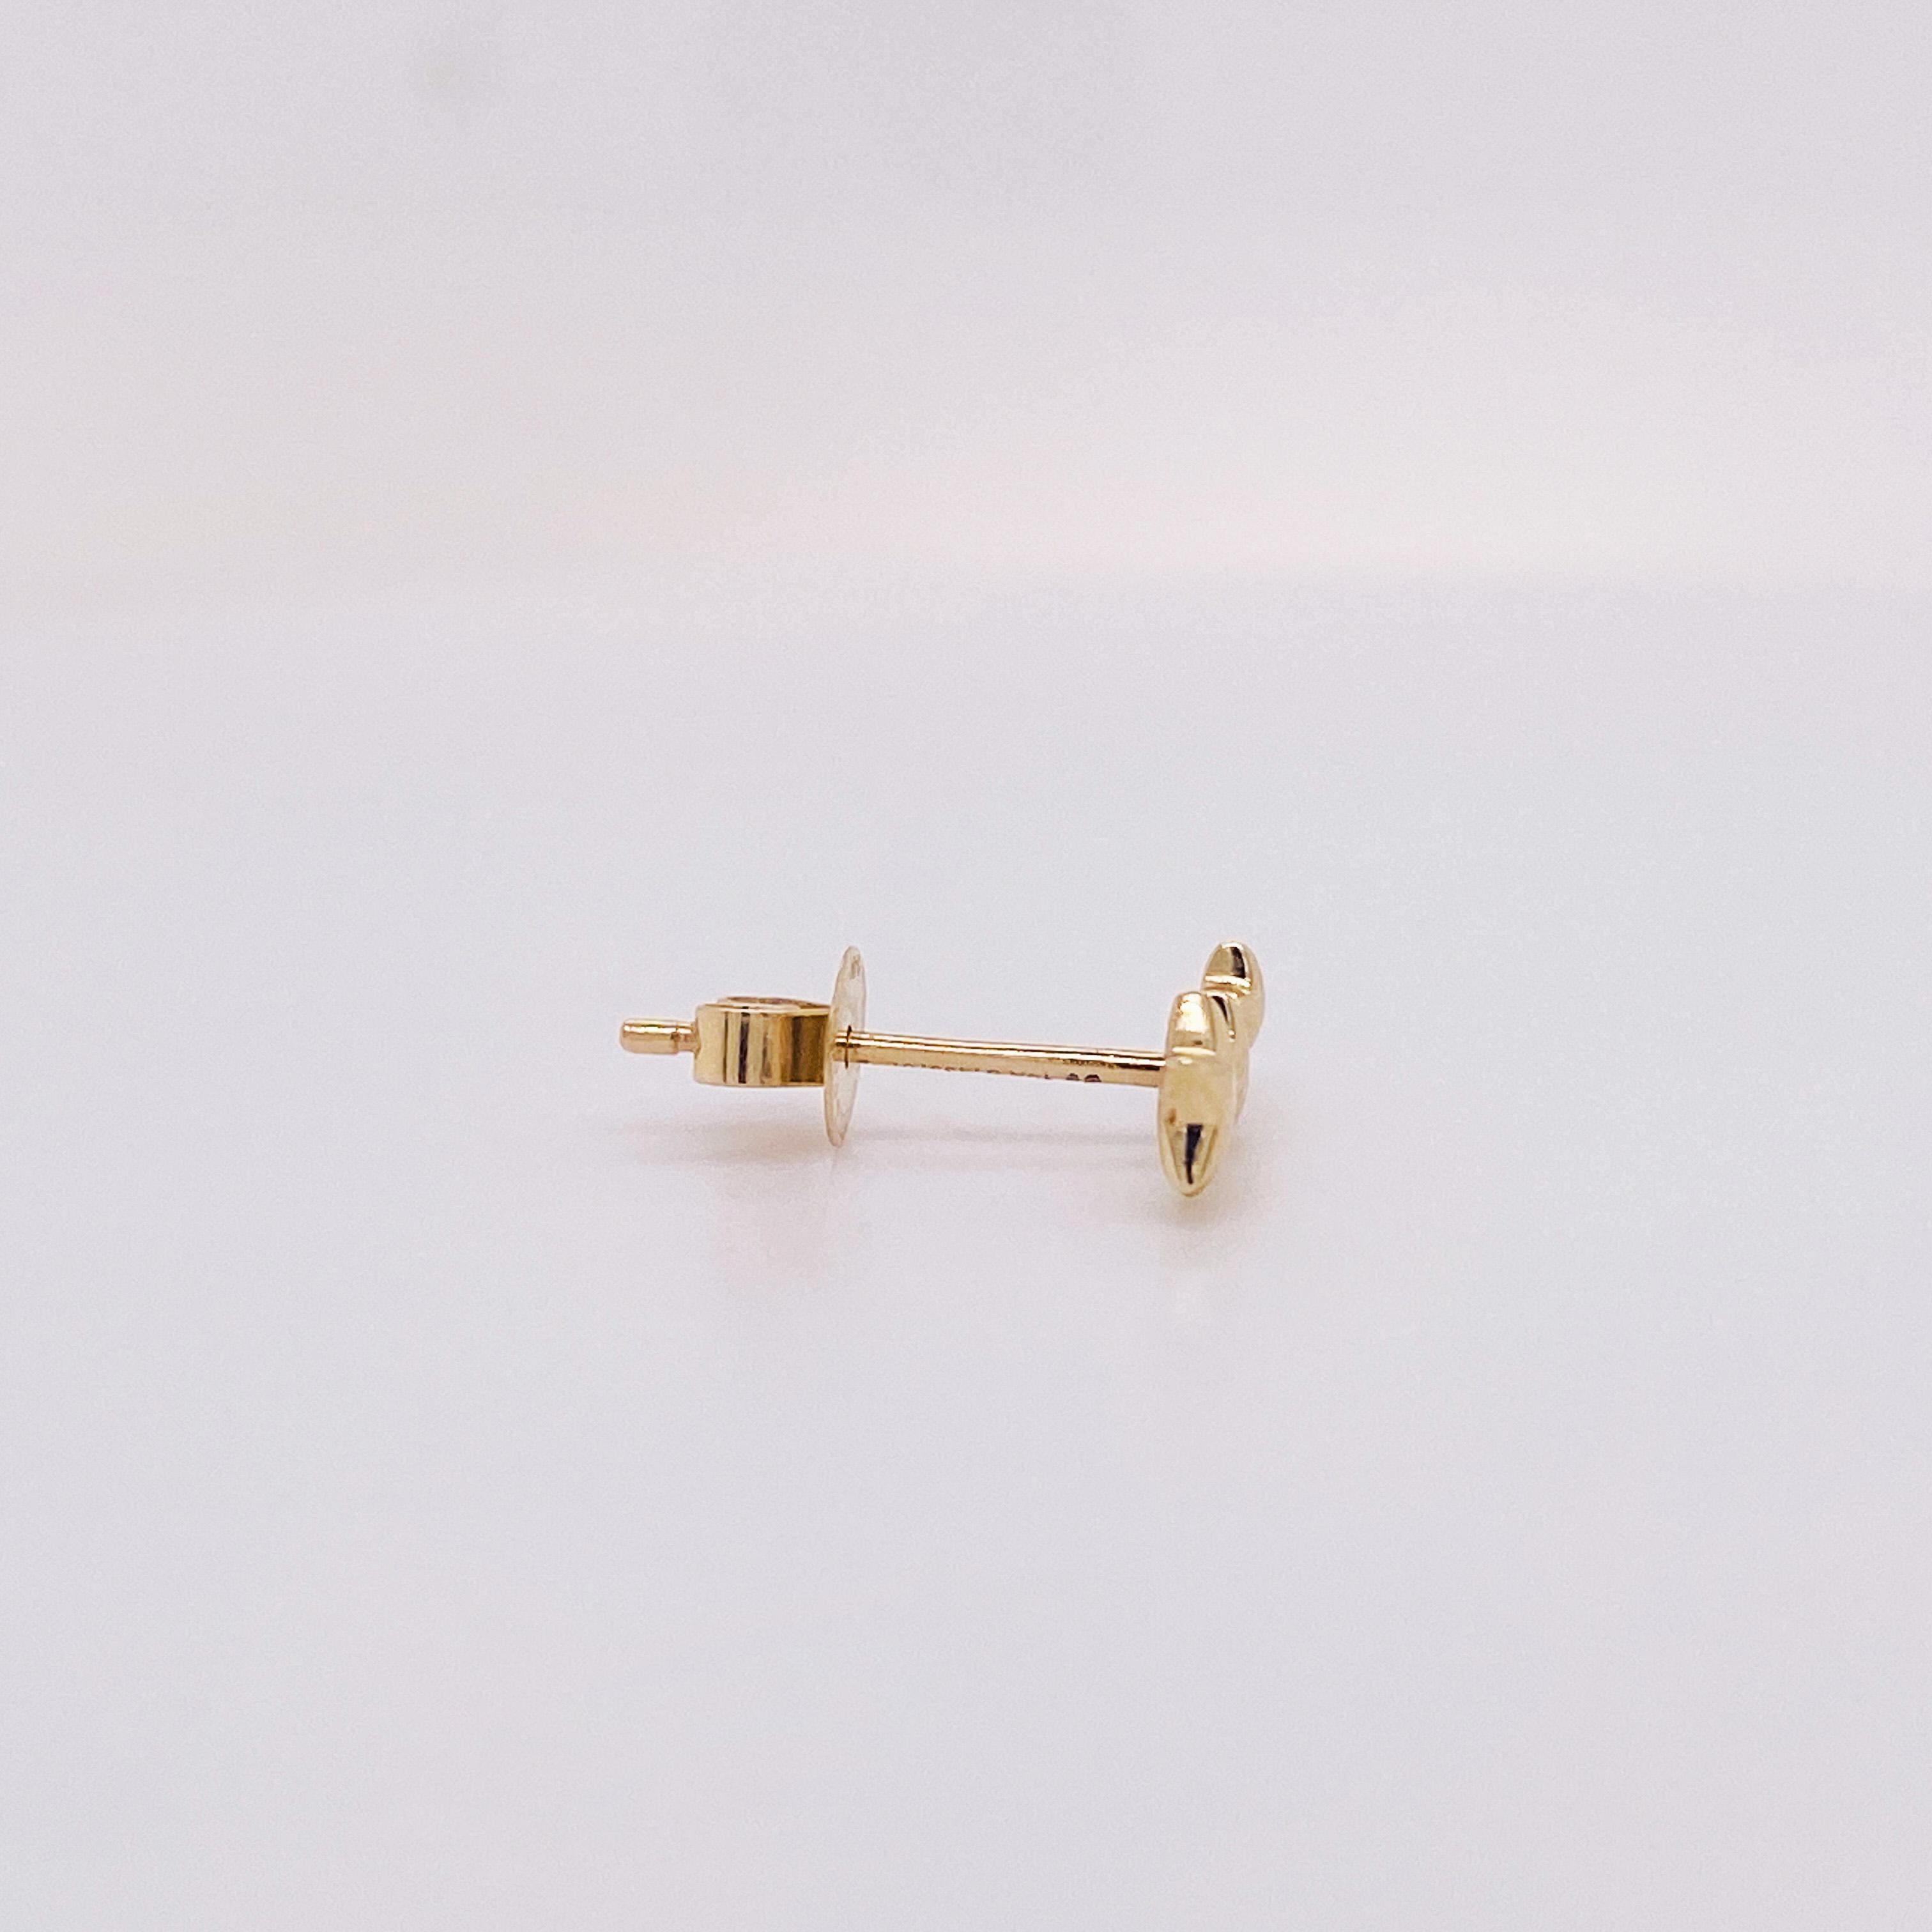 Triple Star Single Stud Earring in Solid 14k Yellow Gold EGS14014Y4JJJ LV In New Condition For Sale In Austin, TX